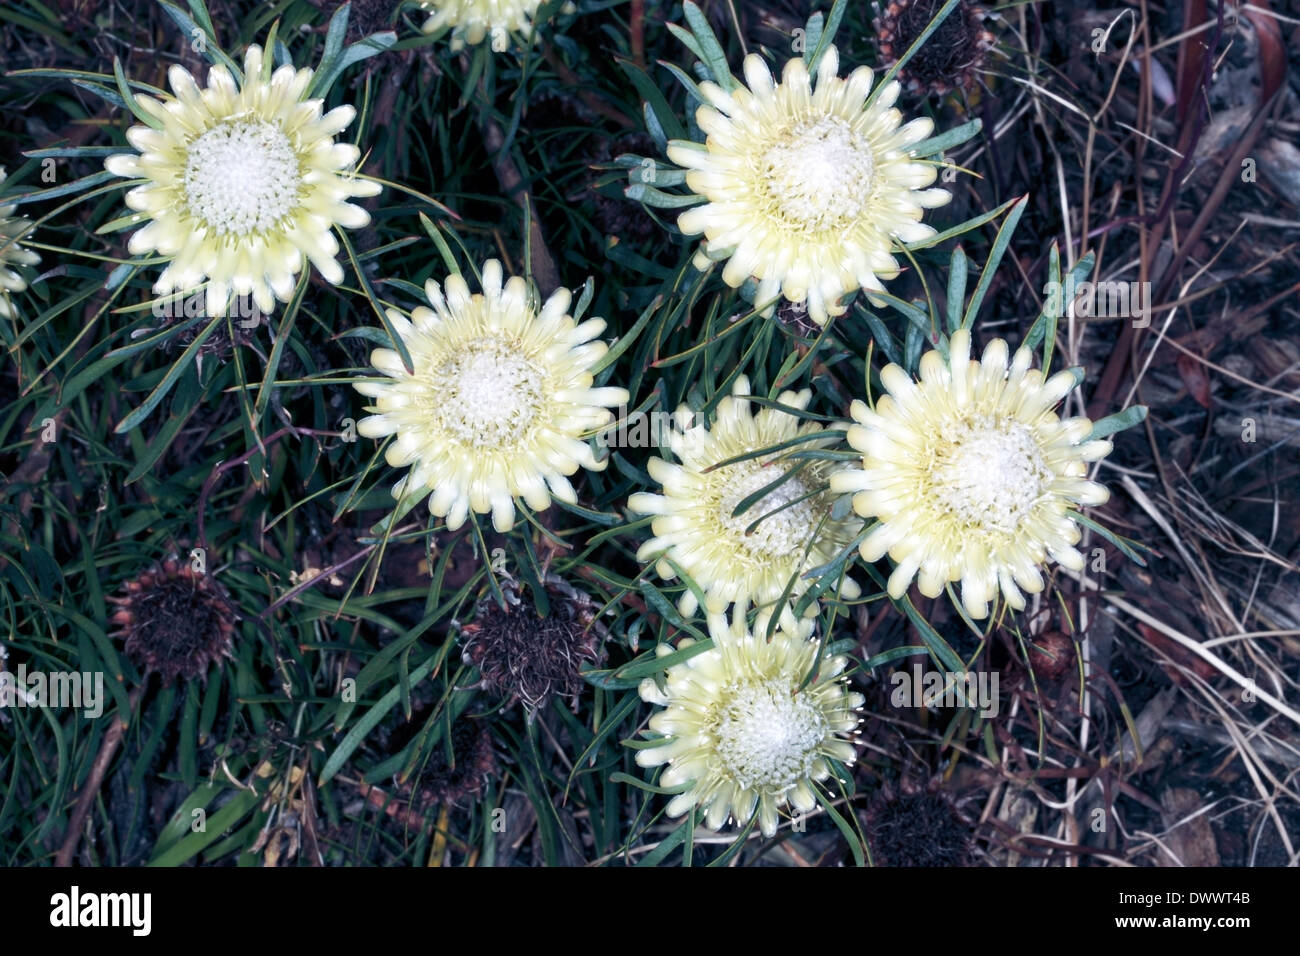 Close up of group of Thistle Proteas / Sugarbush flowers- Protea scolymocephala- Family Proteaceae Stock Photo